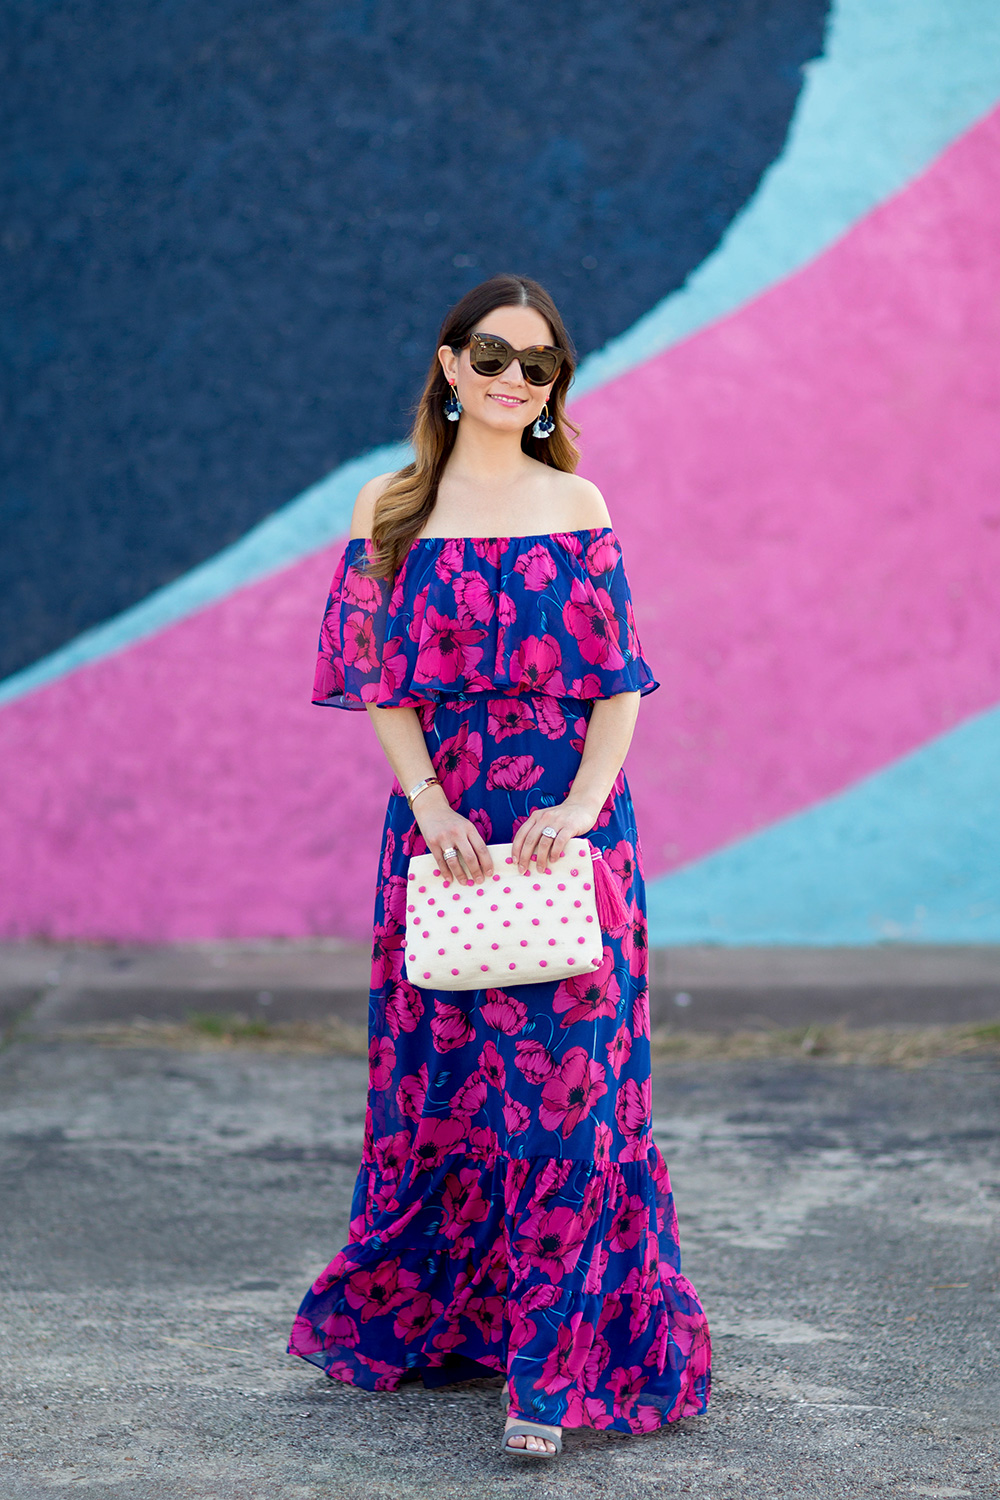 Is this Best Off the Shoulder Maxi Dress? - Style Charade